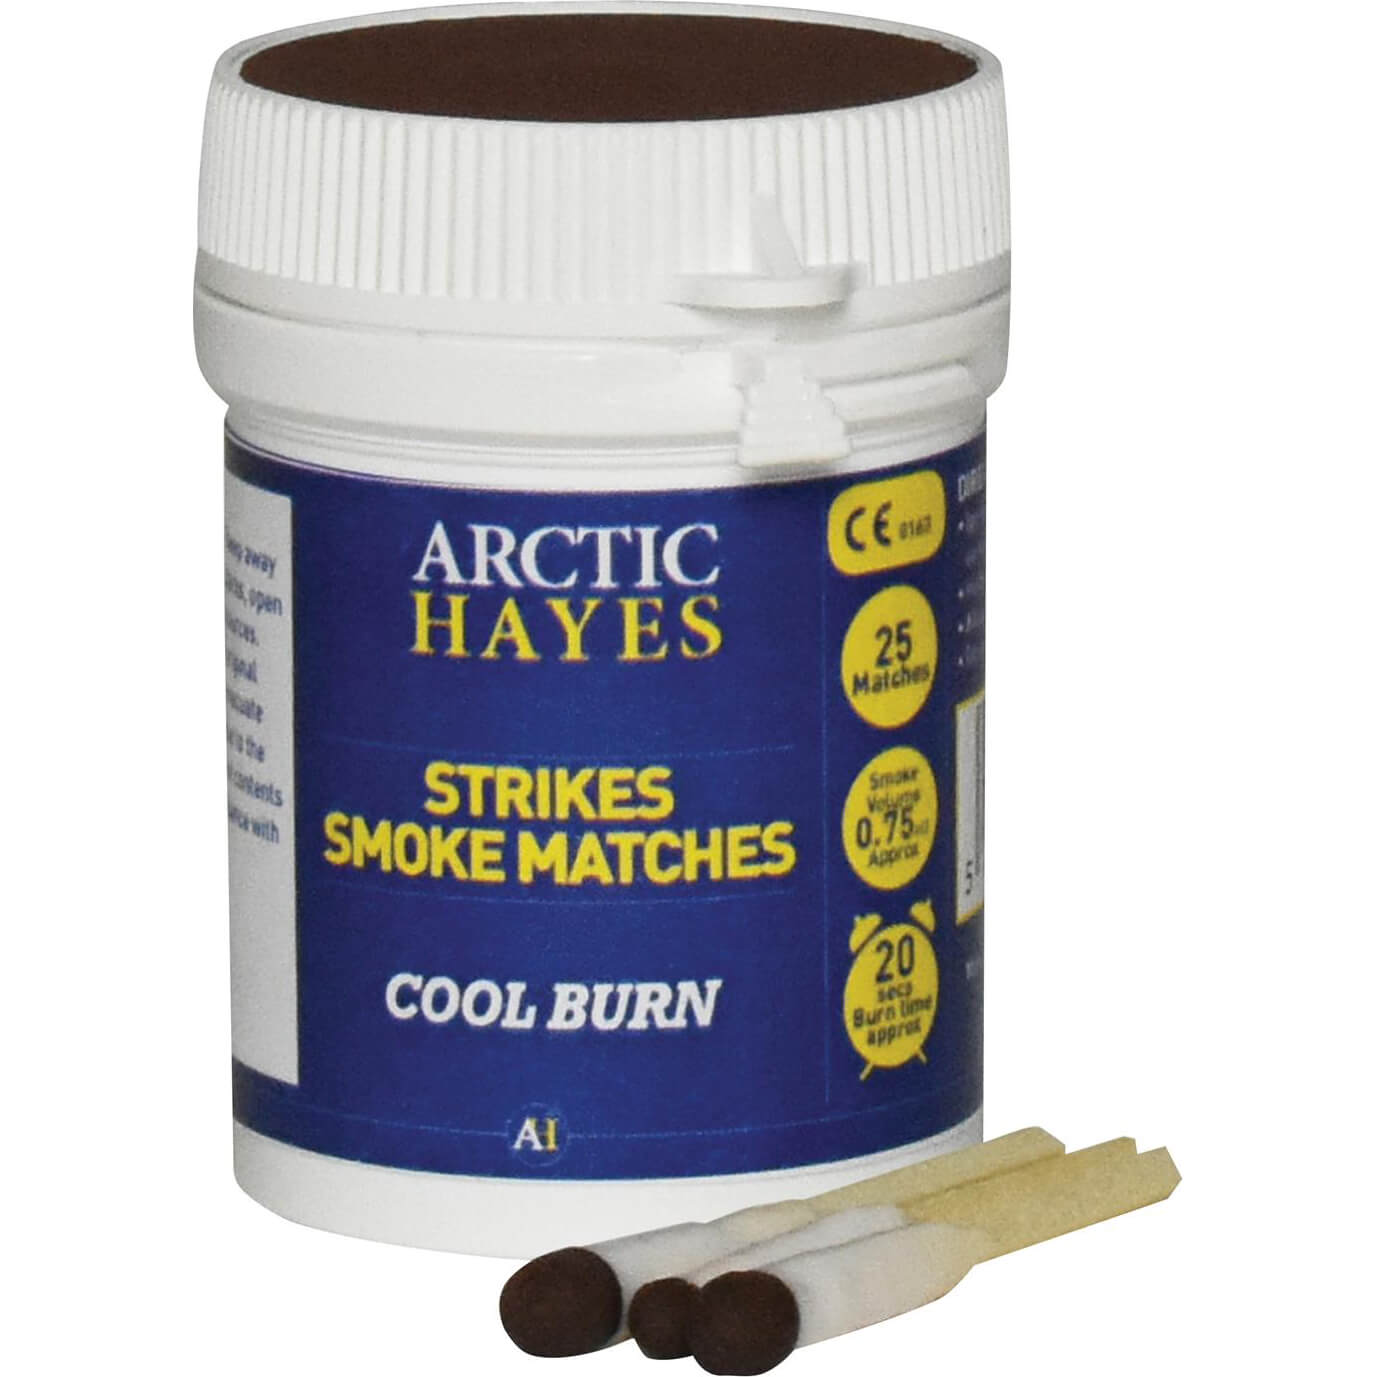 Photos - Other Hand Tools ARCTIC Hayes Strikes Smoke Matches Pack of 25 333000 